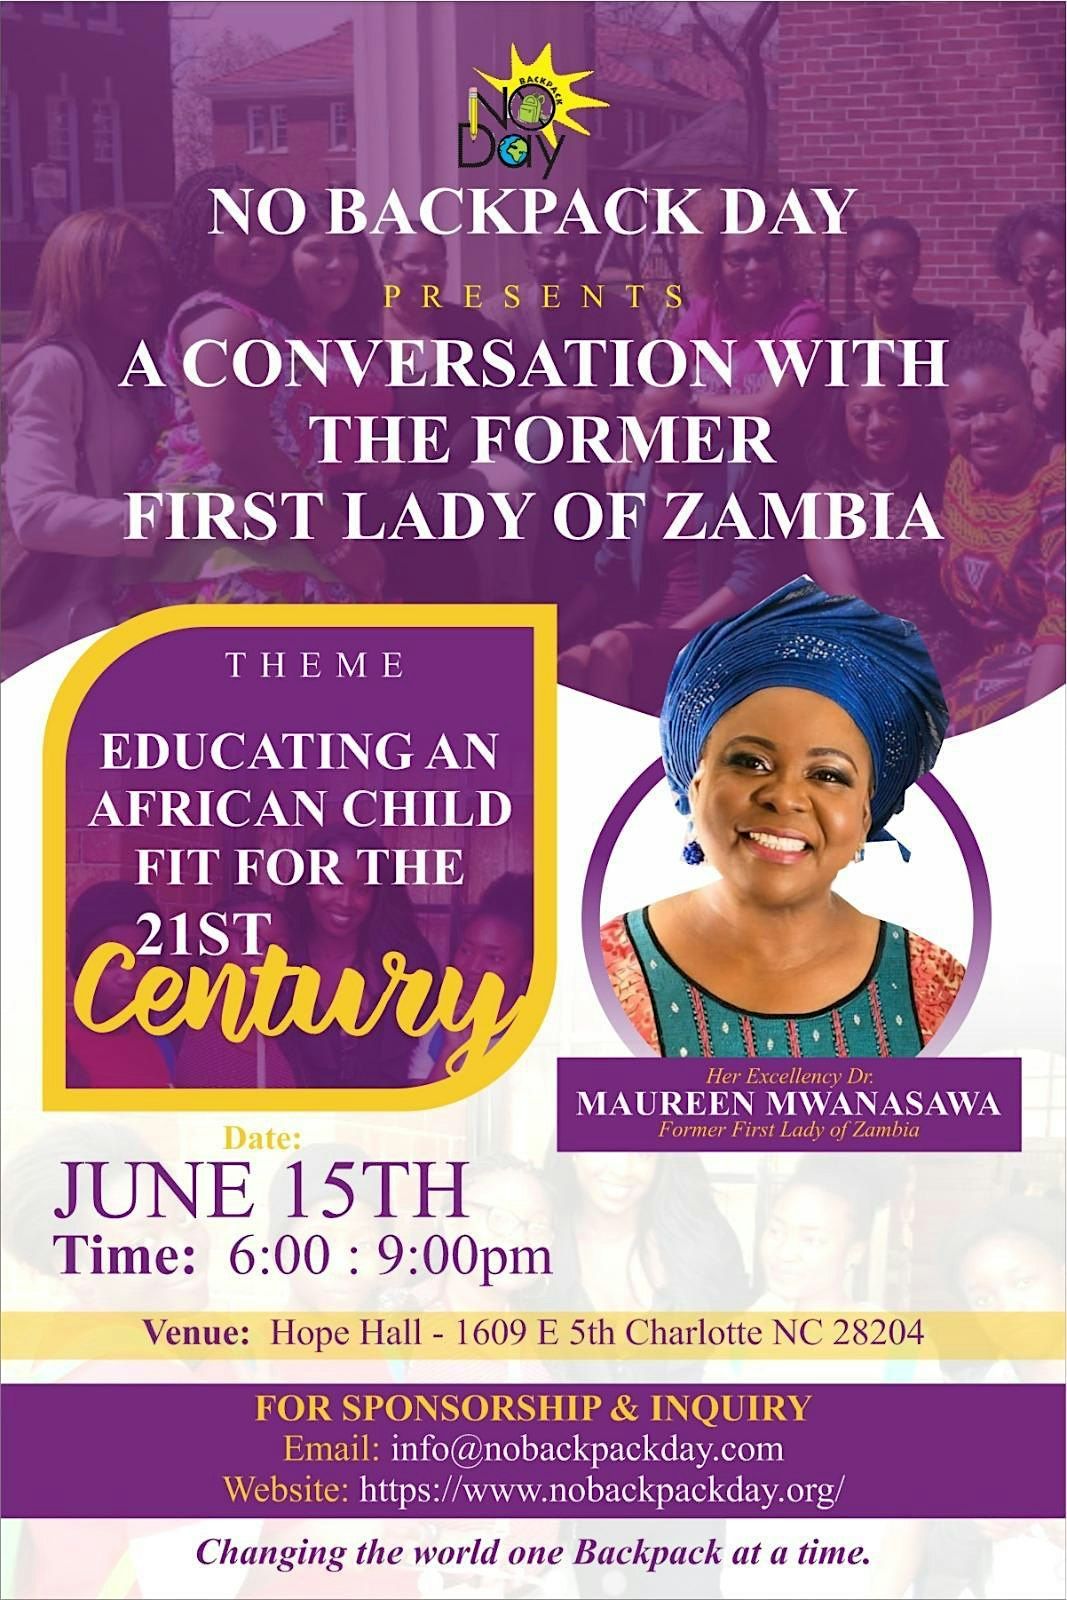 No Backpack Day Presents: A Conversation with the Former First Lady of Zambia